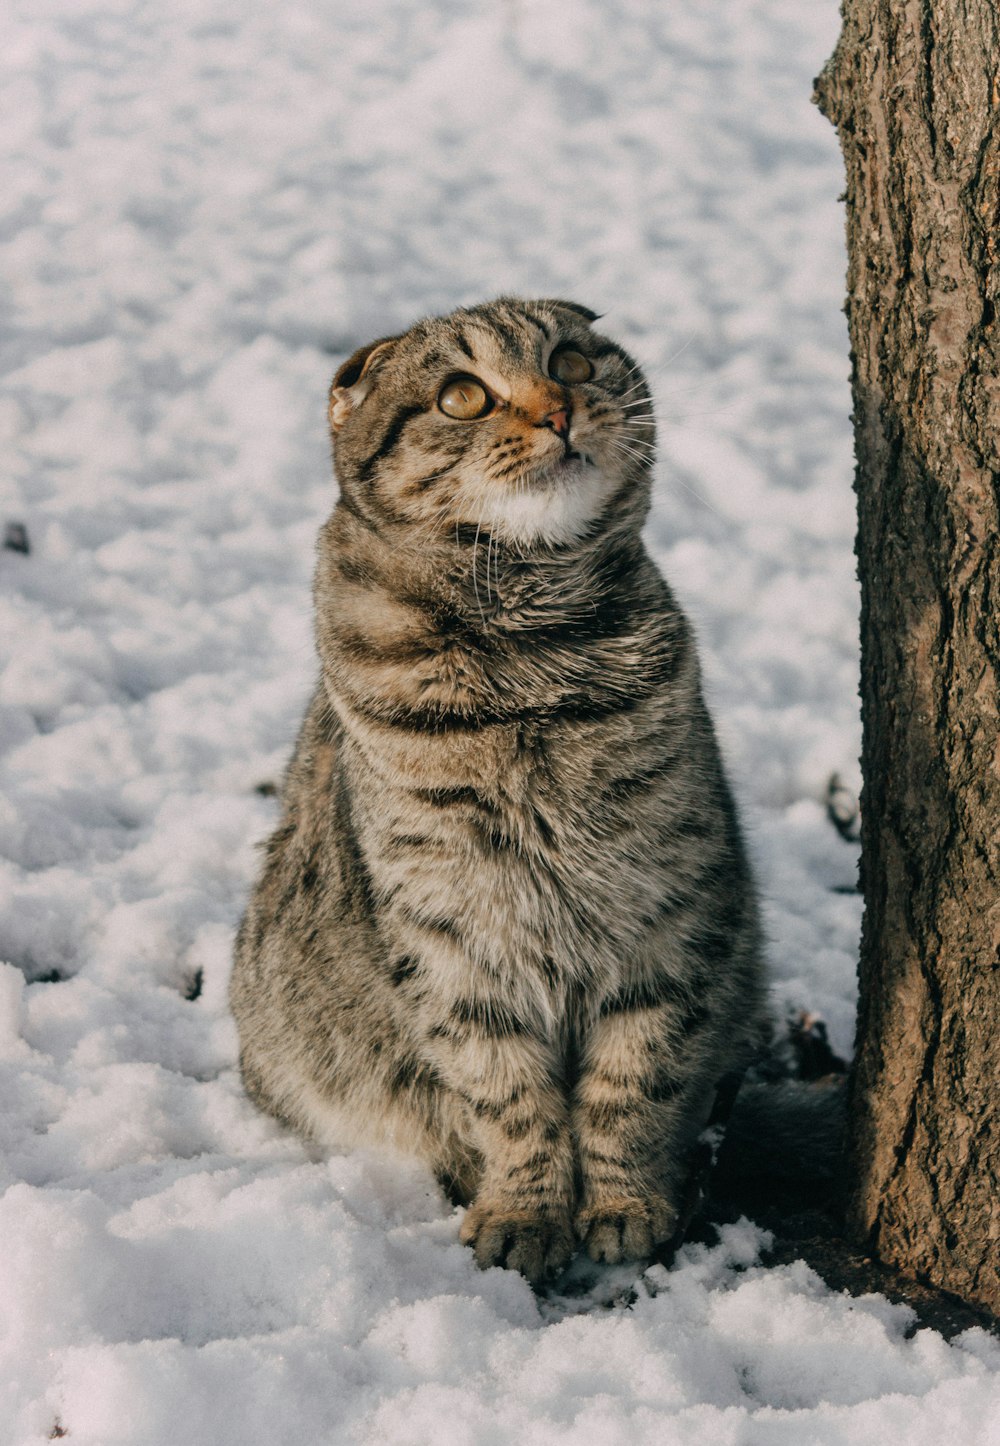 a cat sitting next to a tree in the snow